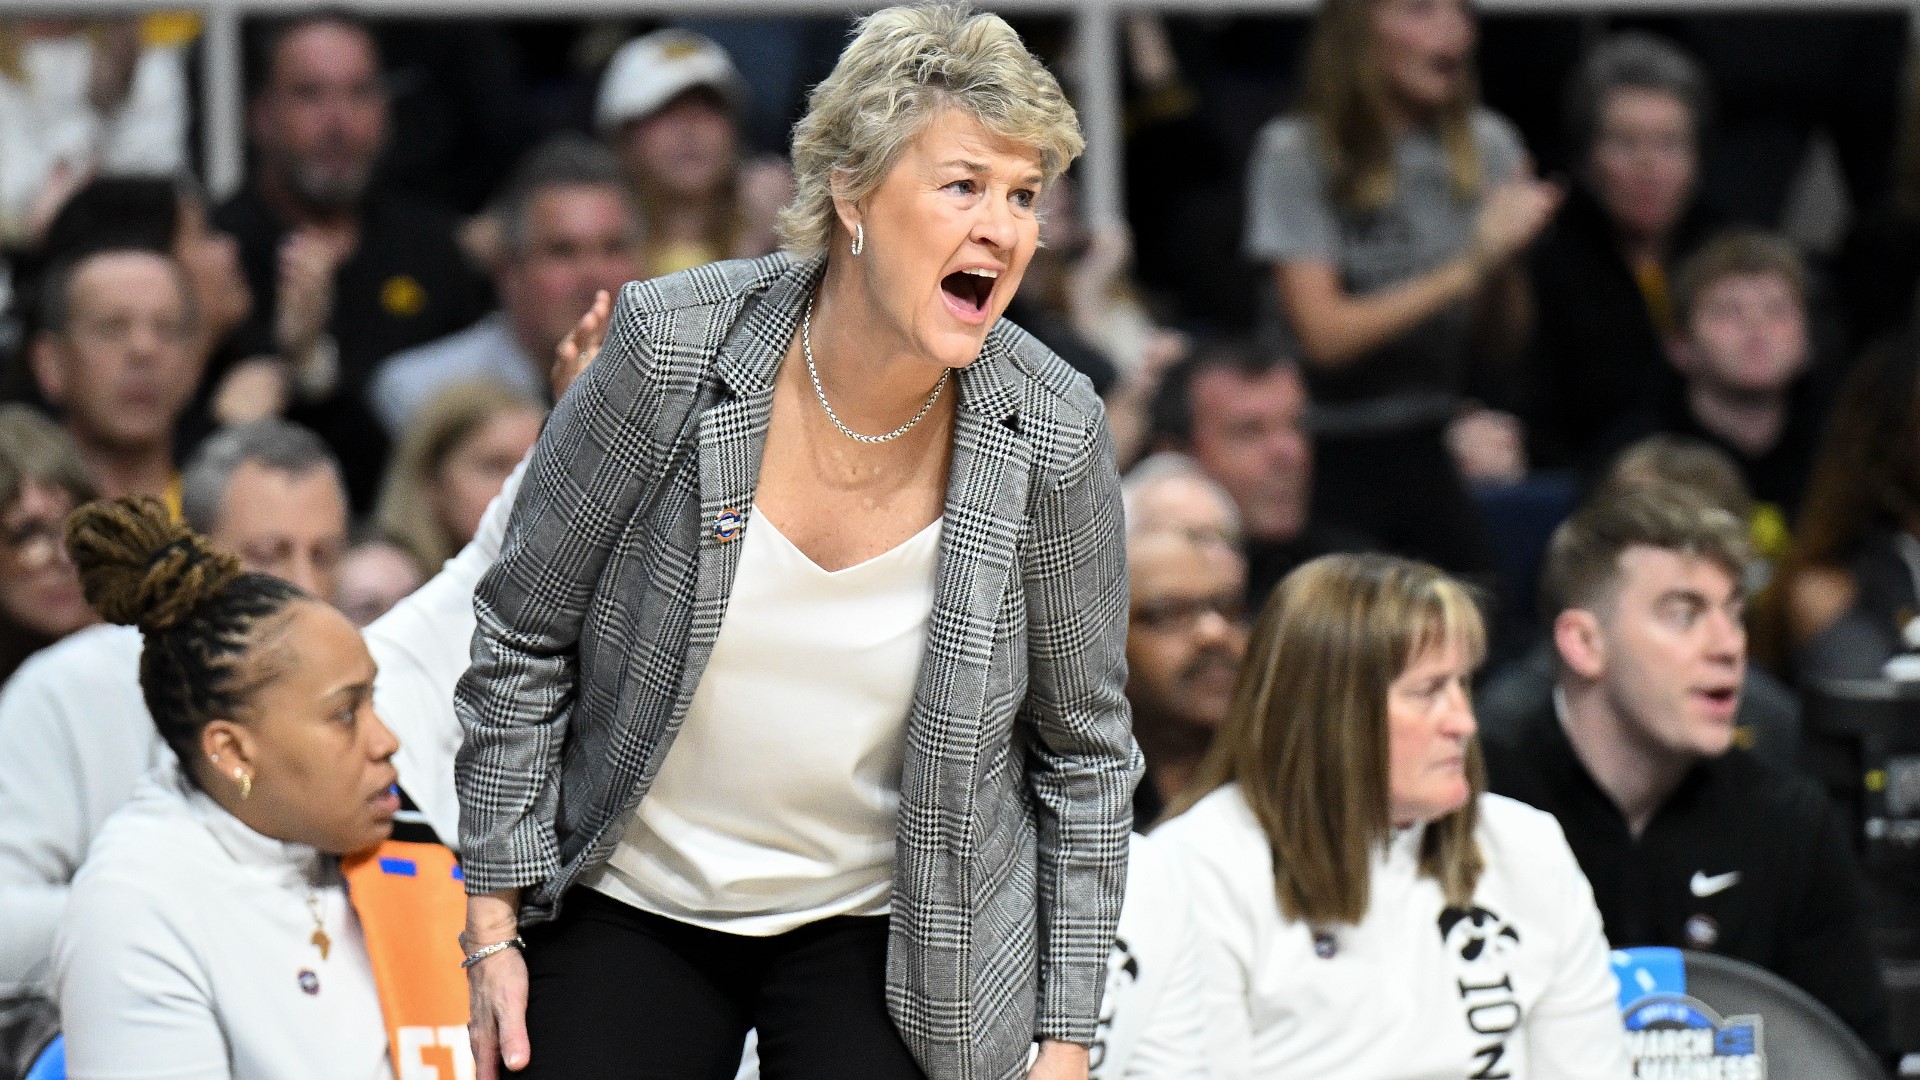 When Iowa basketball is mentioned, most think logo threes and the legend of Caitlin Clark — but, according to the players, the backbone of it all is their coach.